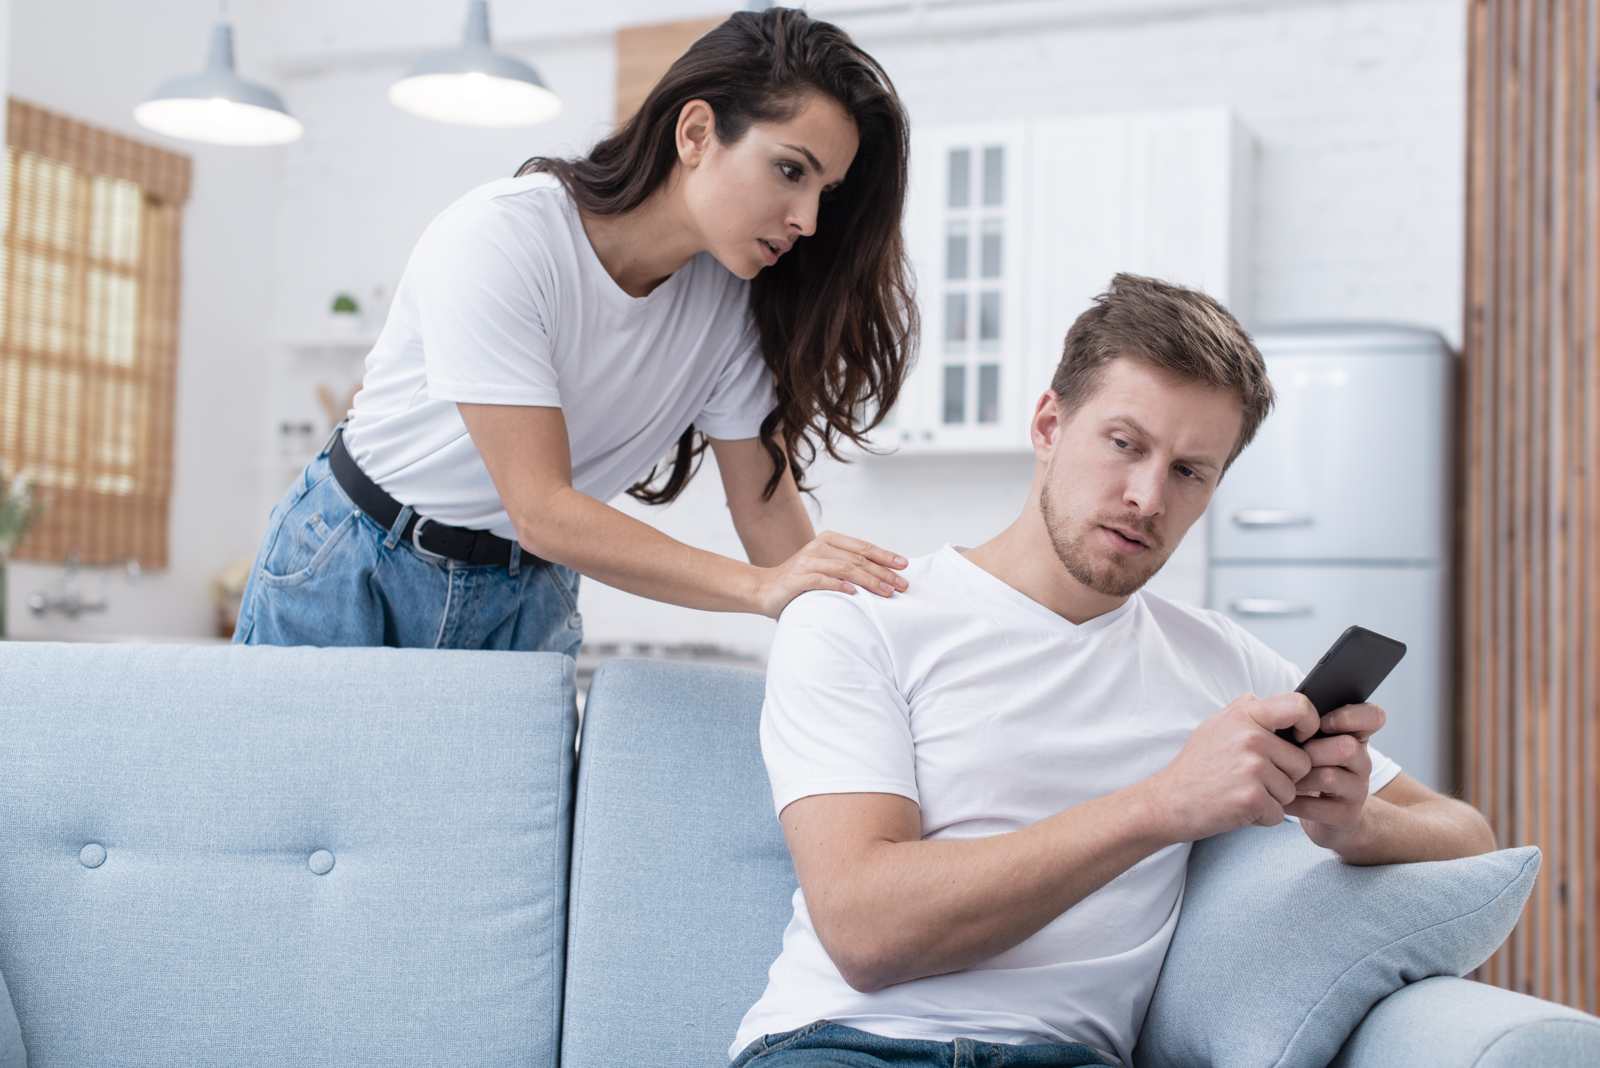 Wife catches husband texting his mistress. Cheating Spouse Investigations Orlando